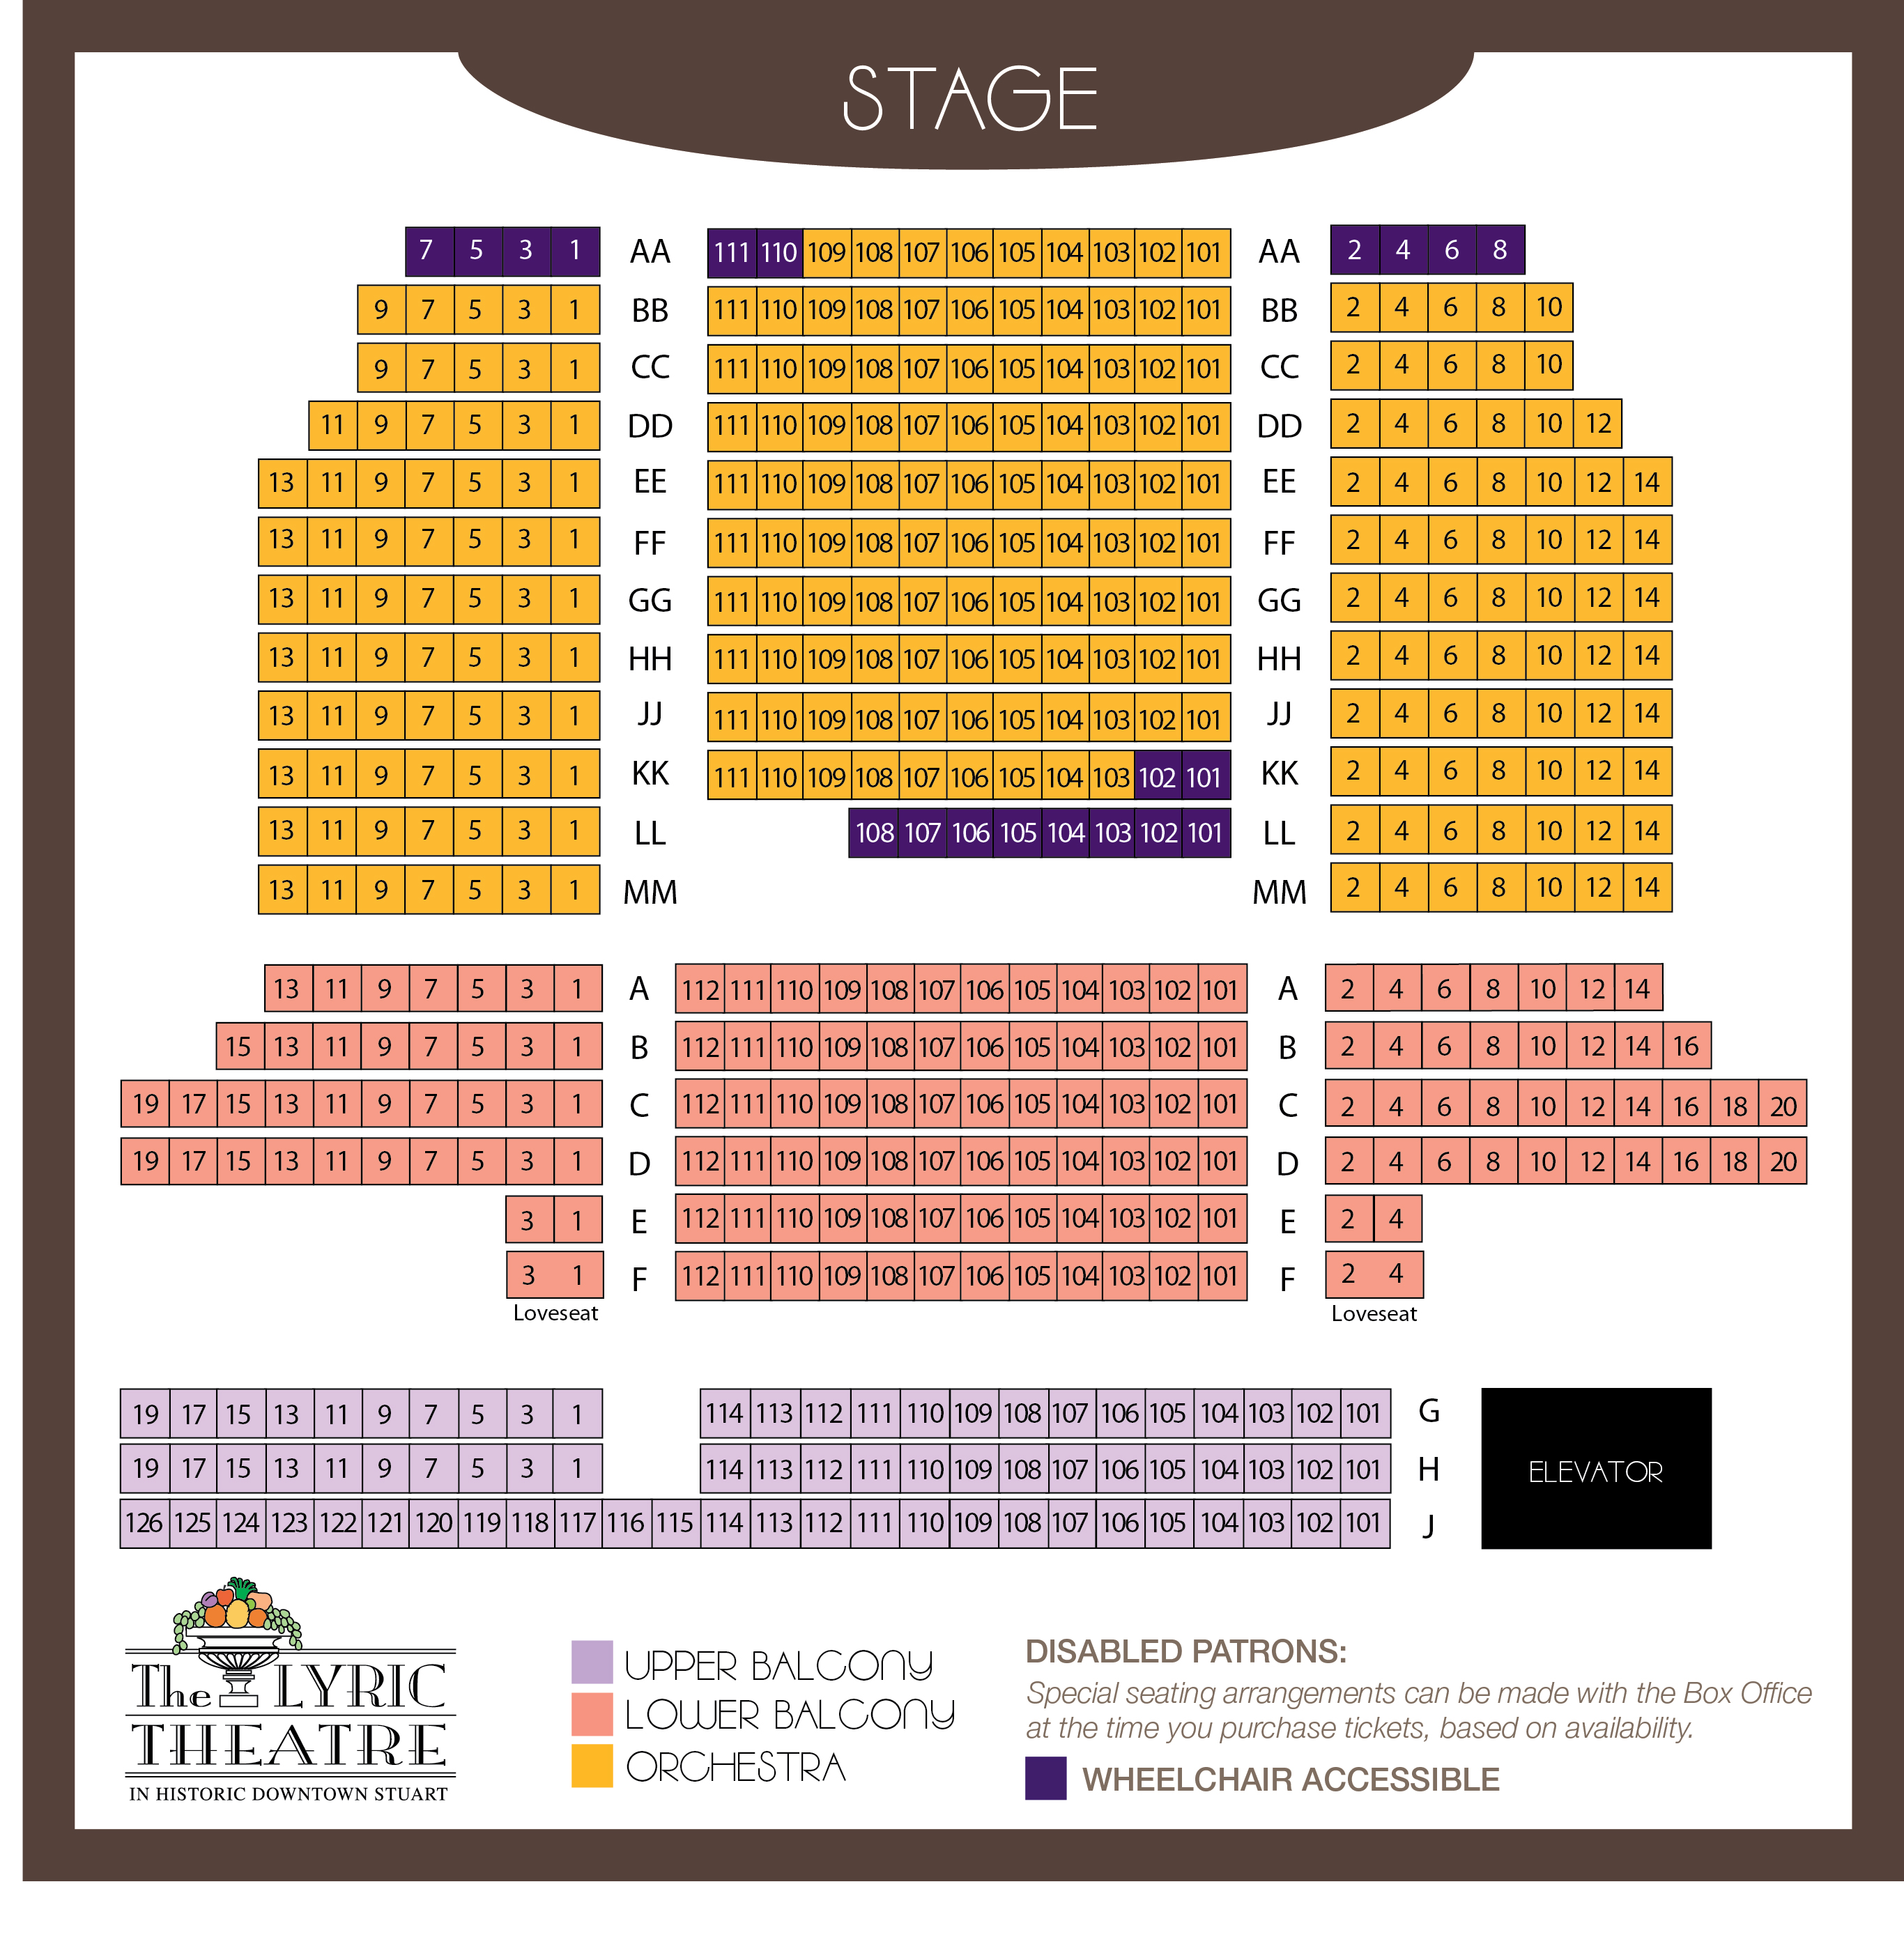 Theatre Specifications | The Lyric Theatre